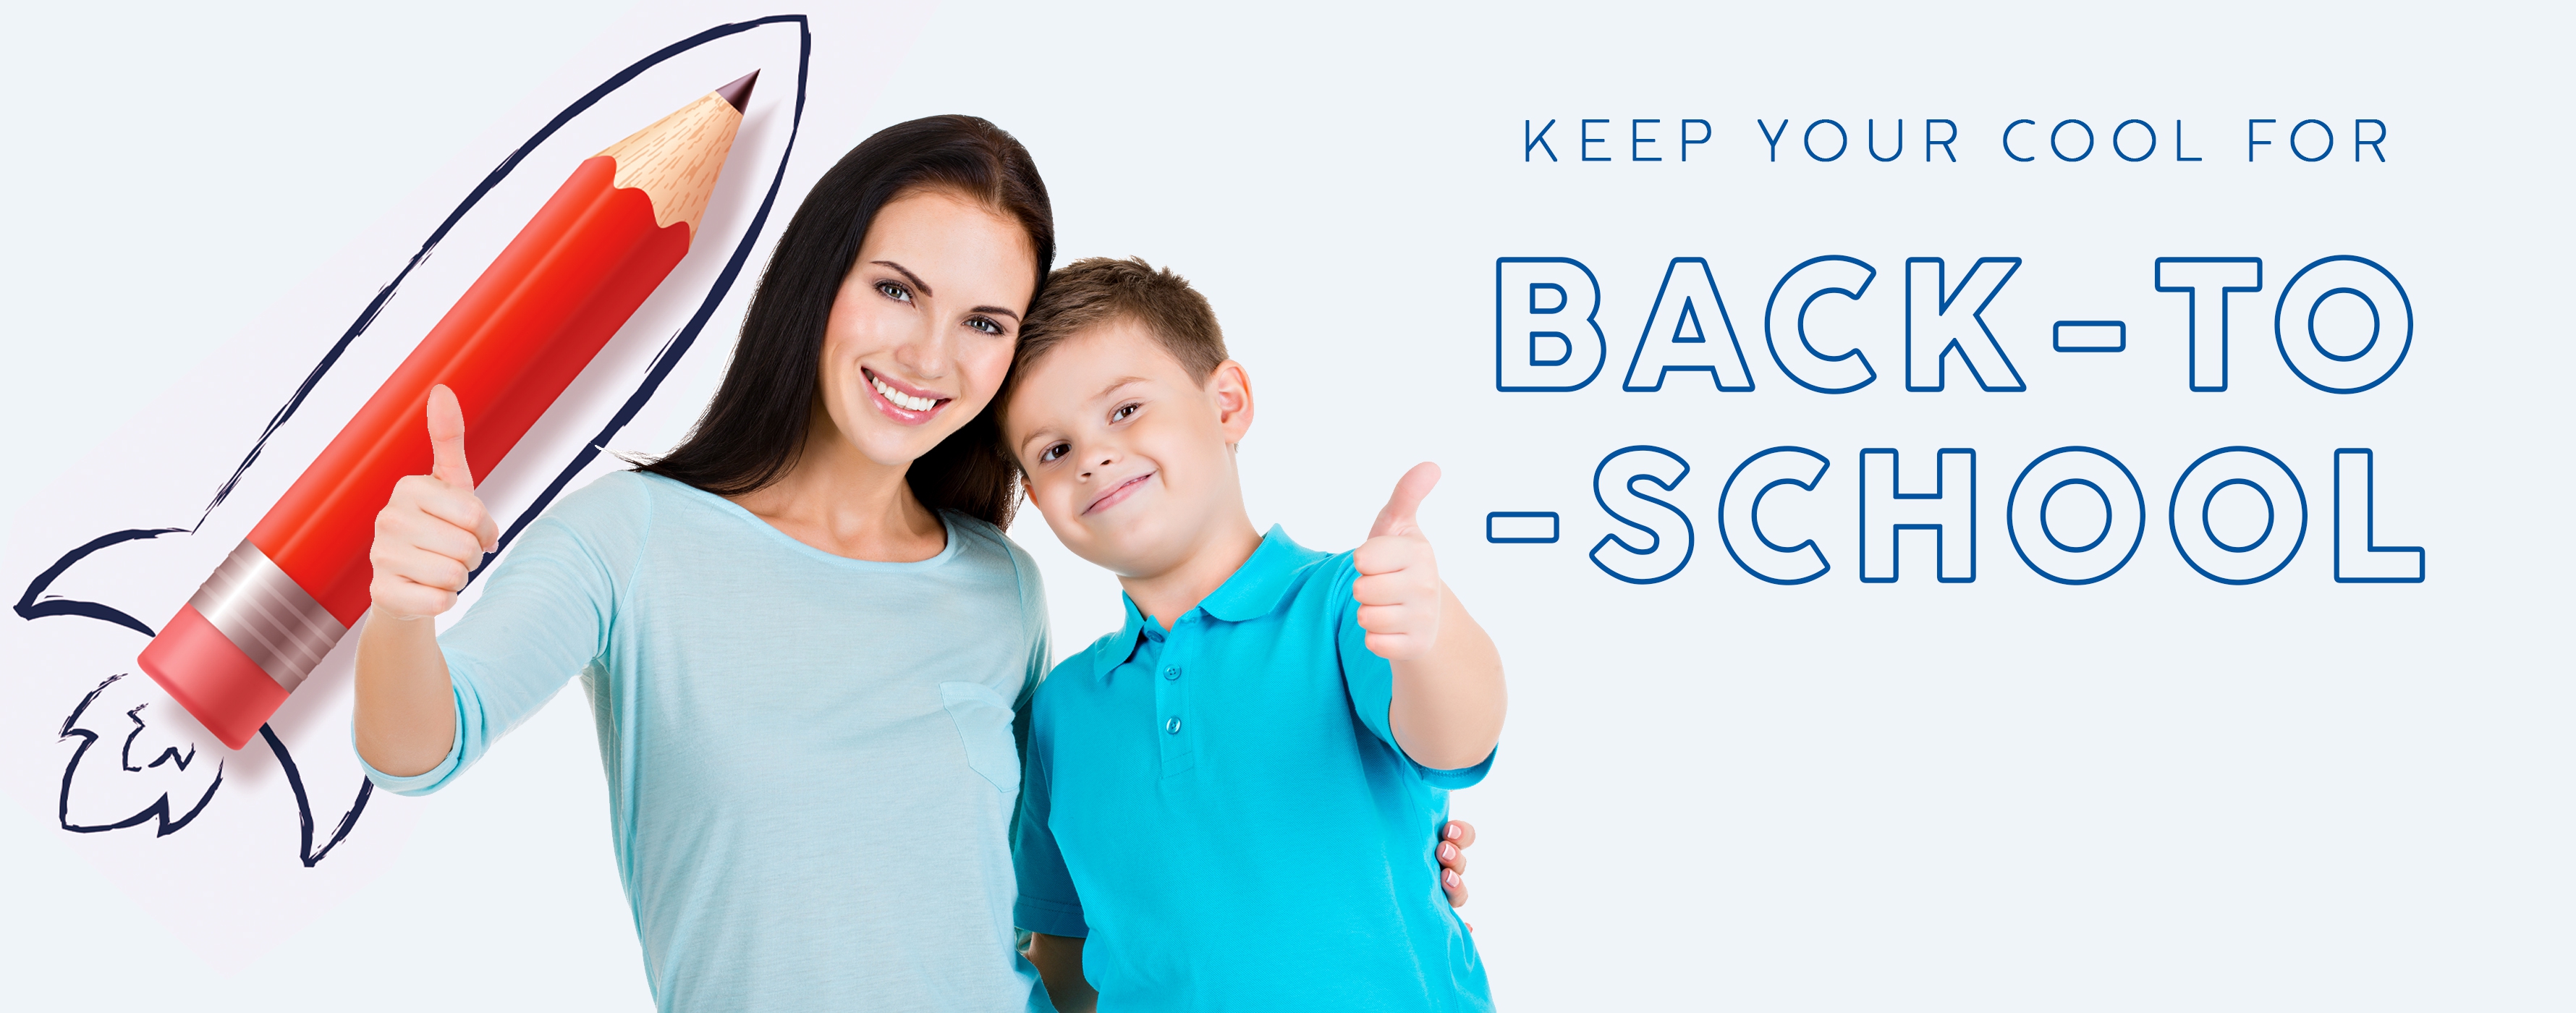 It’s time for Back to School – and time to keep your cool.